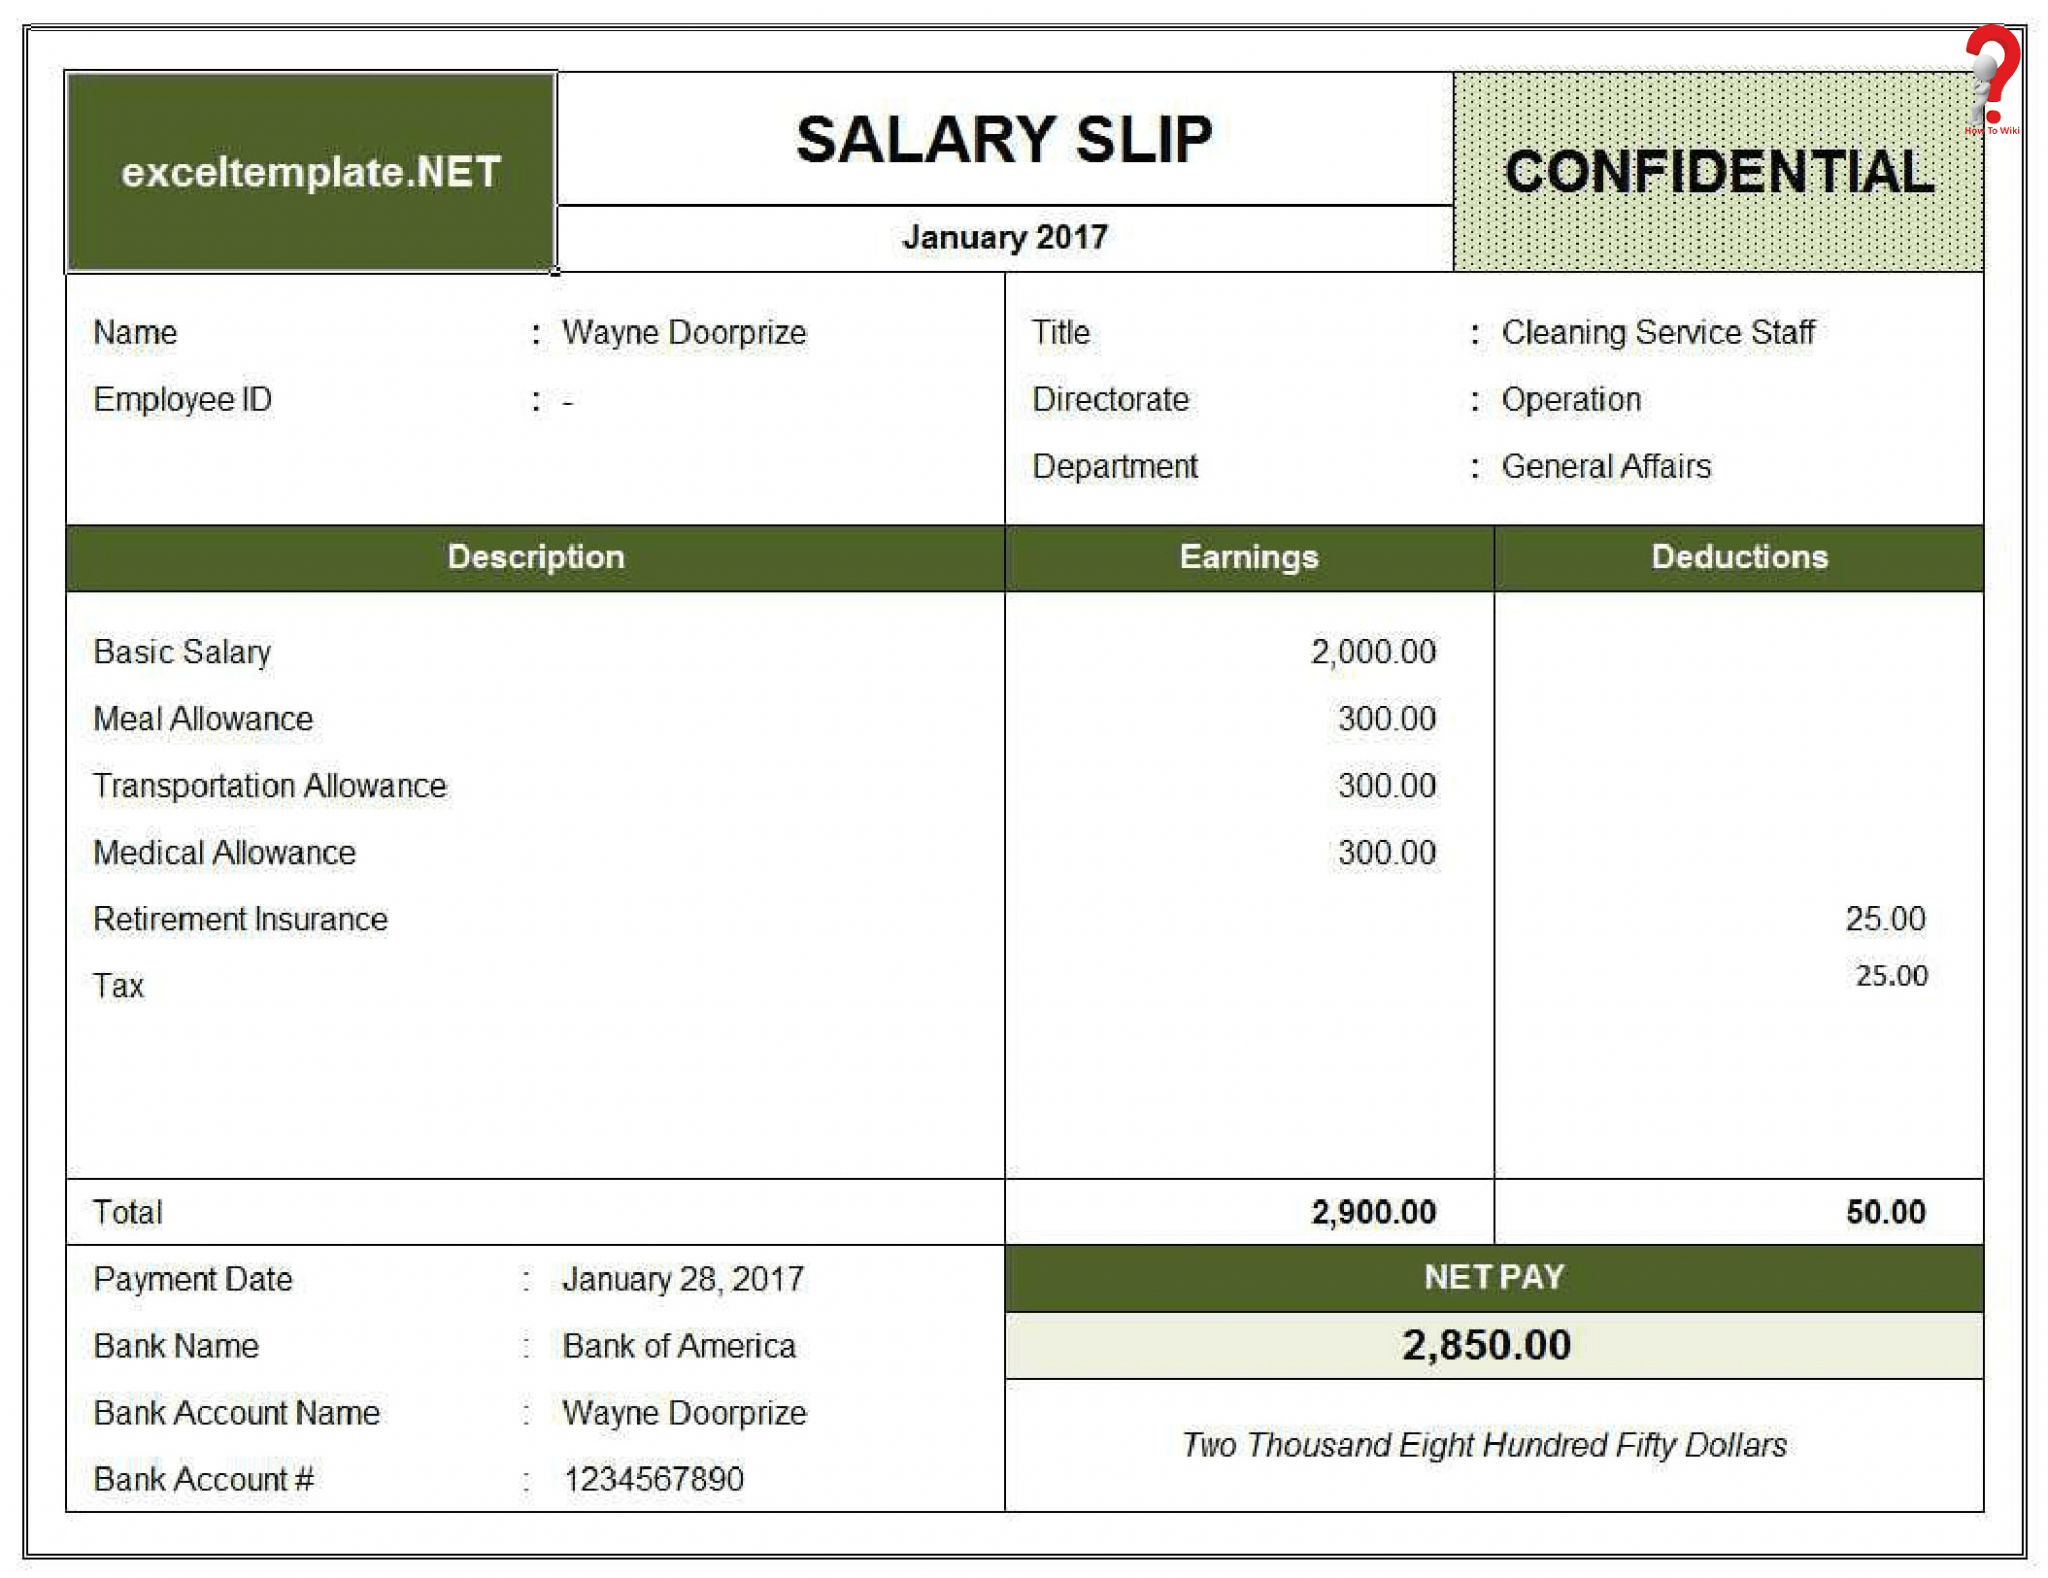 Salary Slip Format In Excel 25000 IMAGESEE